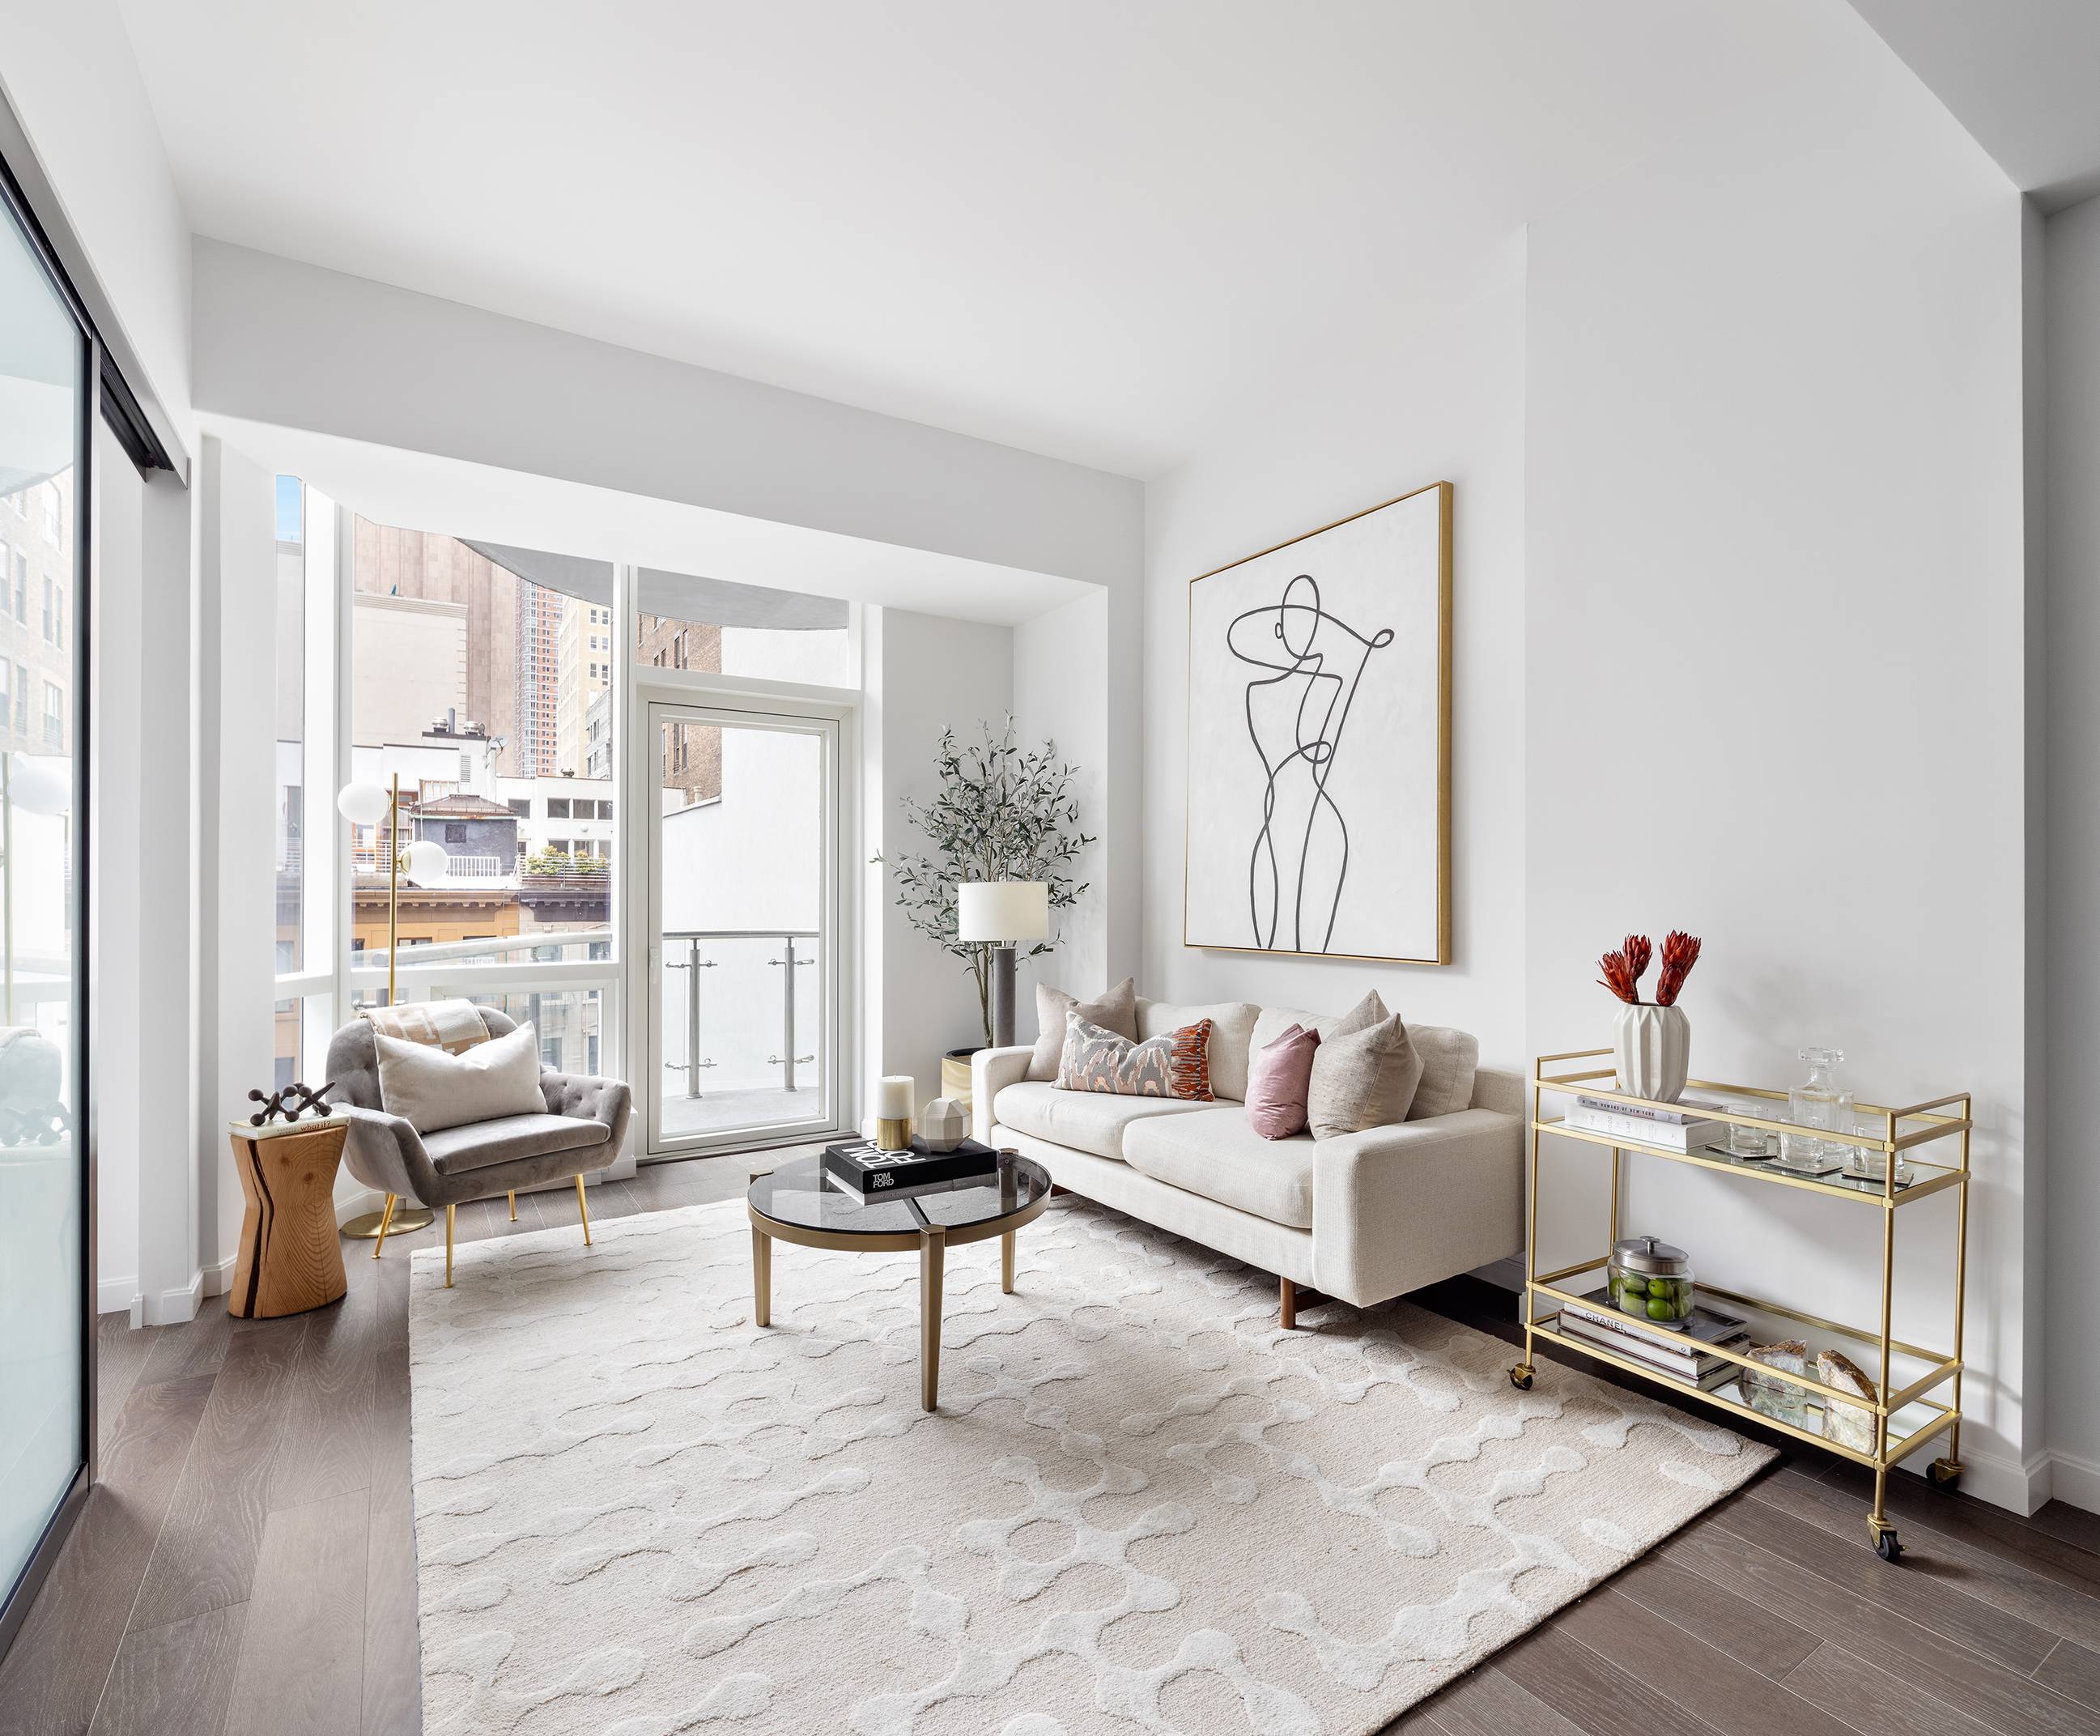 Welcome to this gleaming half floor loft at TriBeCa's newest luxury tower, a stunning 1 bedroom, 1 bathroom home suffused with Lower Manhattan views and bright northern light.